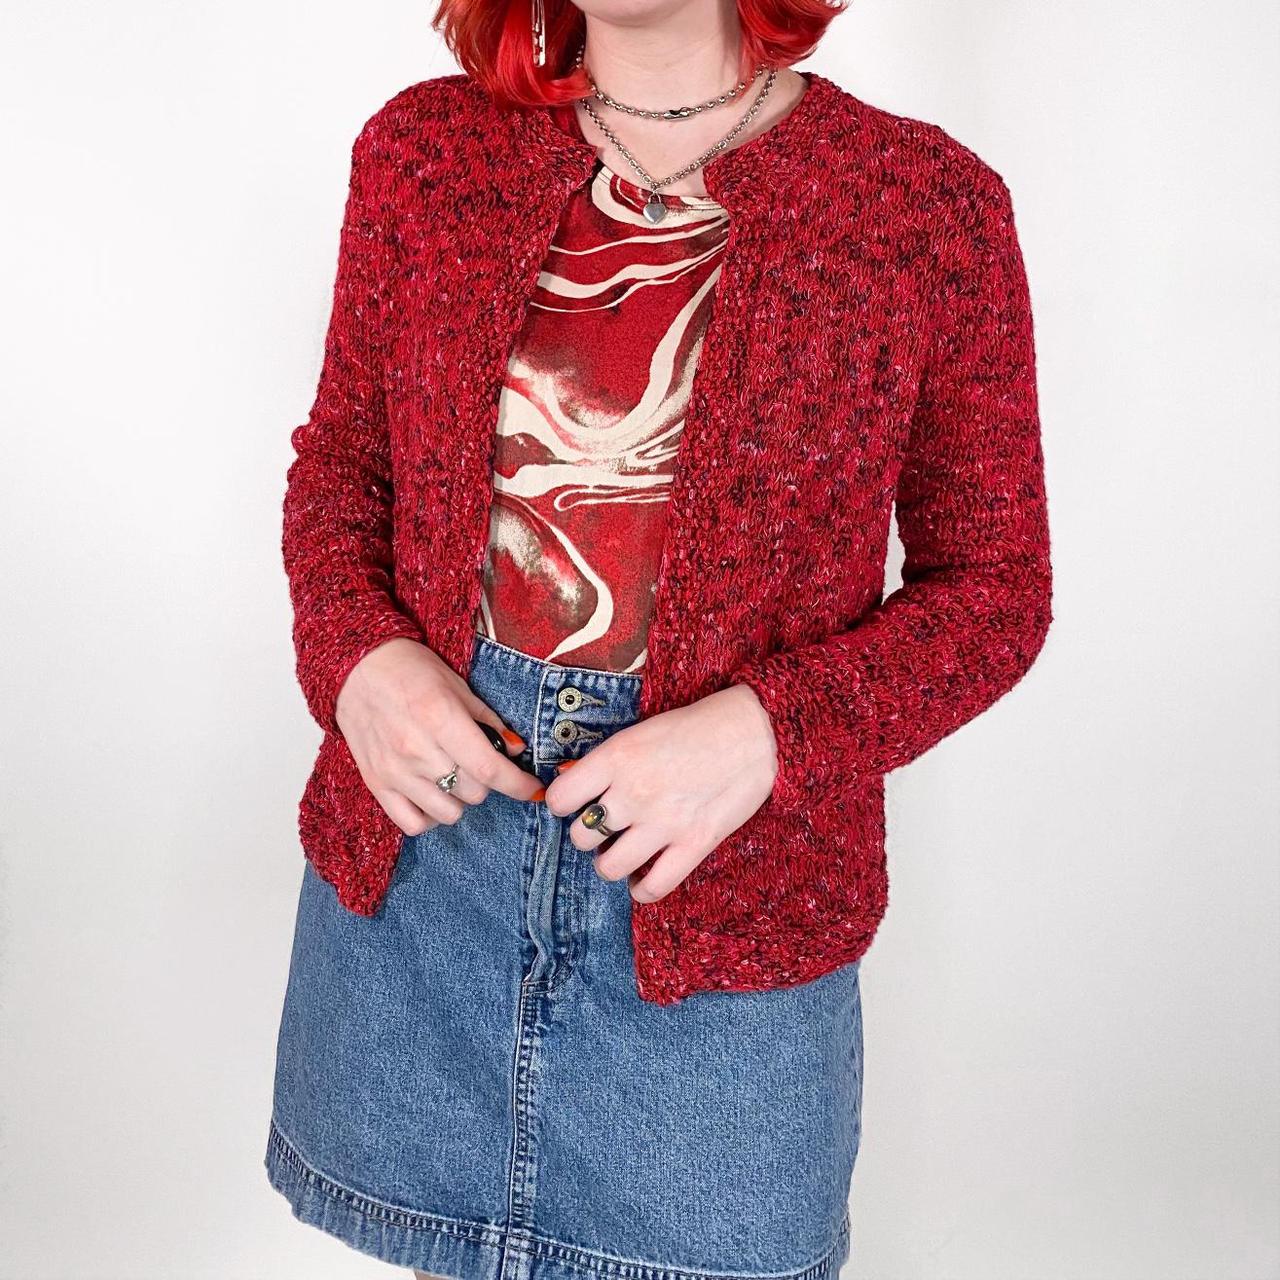 Product Image 1 - Red marble knit cardigan 🍓

Fits